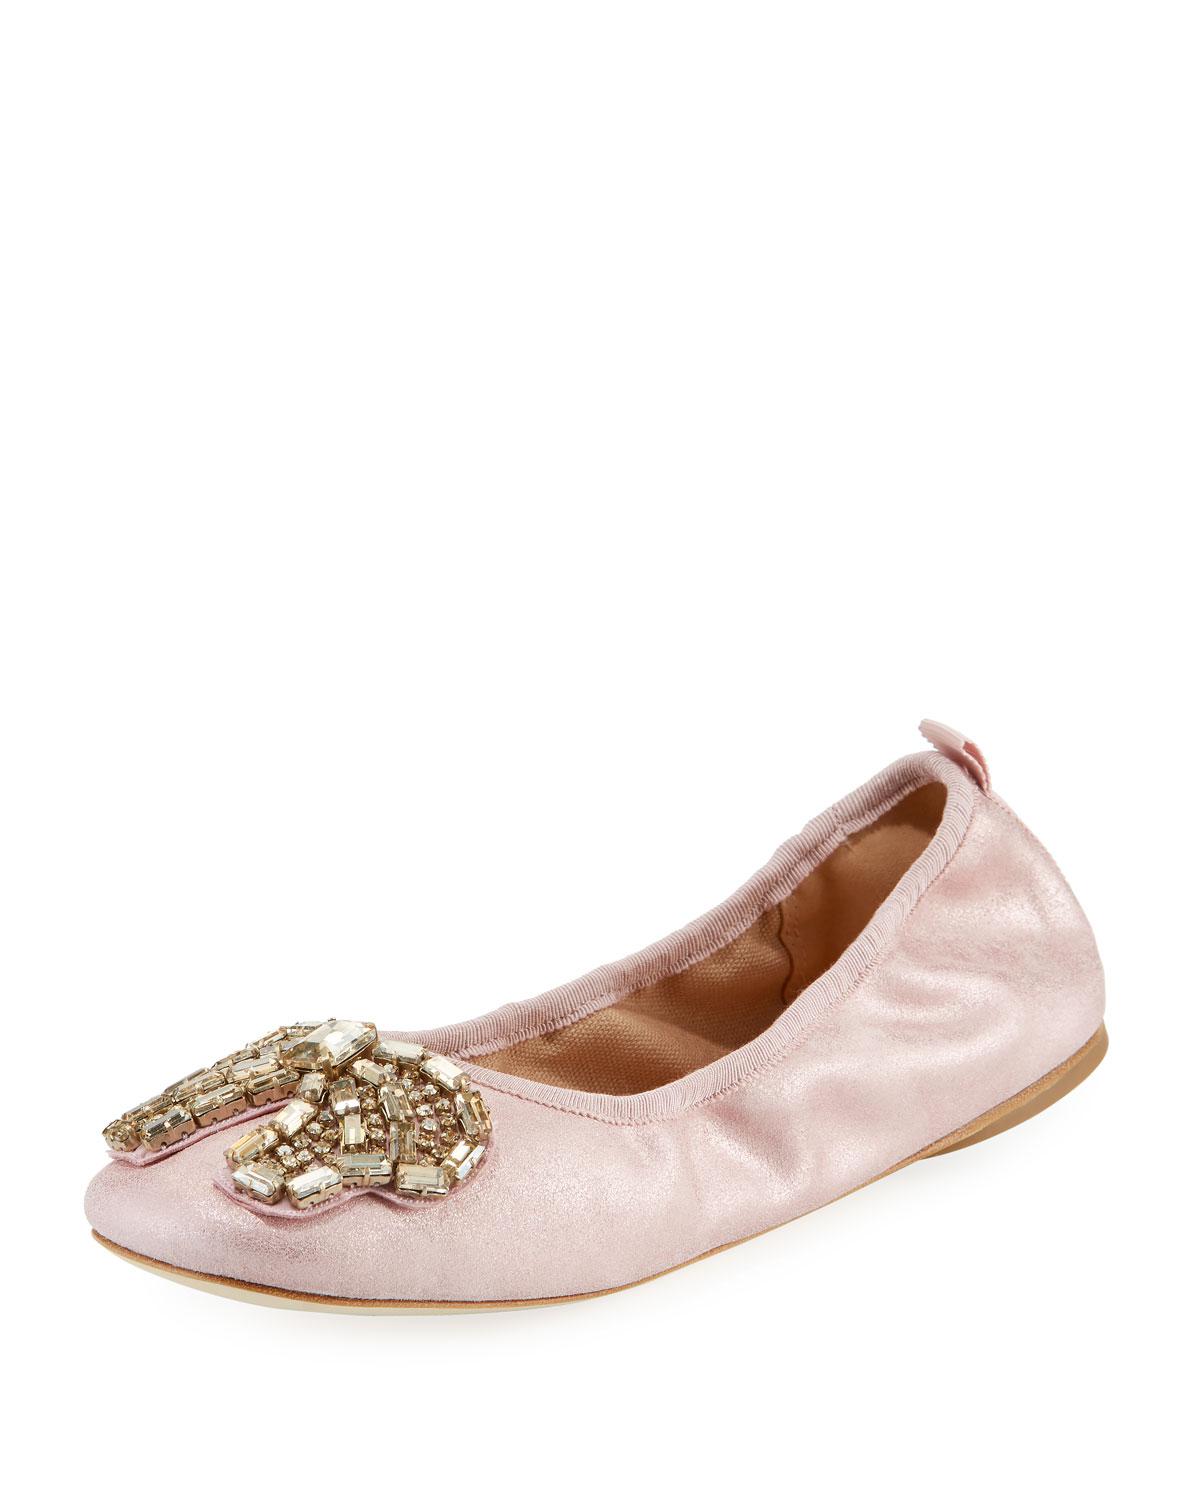 COACH Suede Margot Crystal-bow Ballet Flats in Metallic Rose (Pink) - Lyst